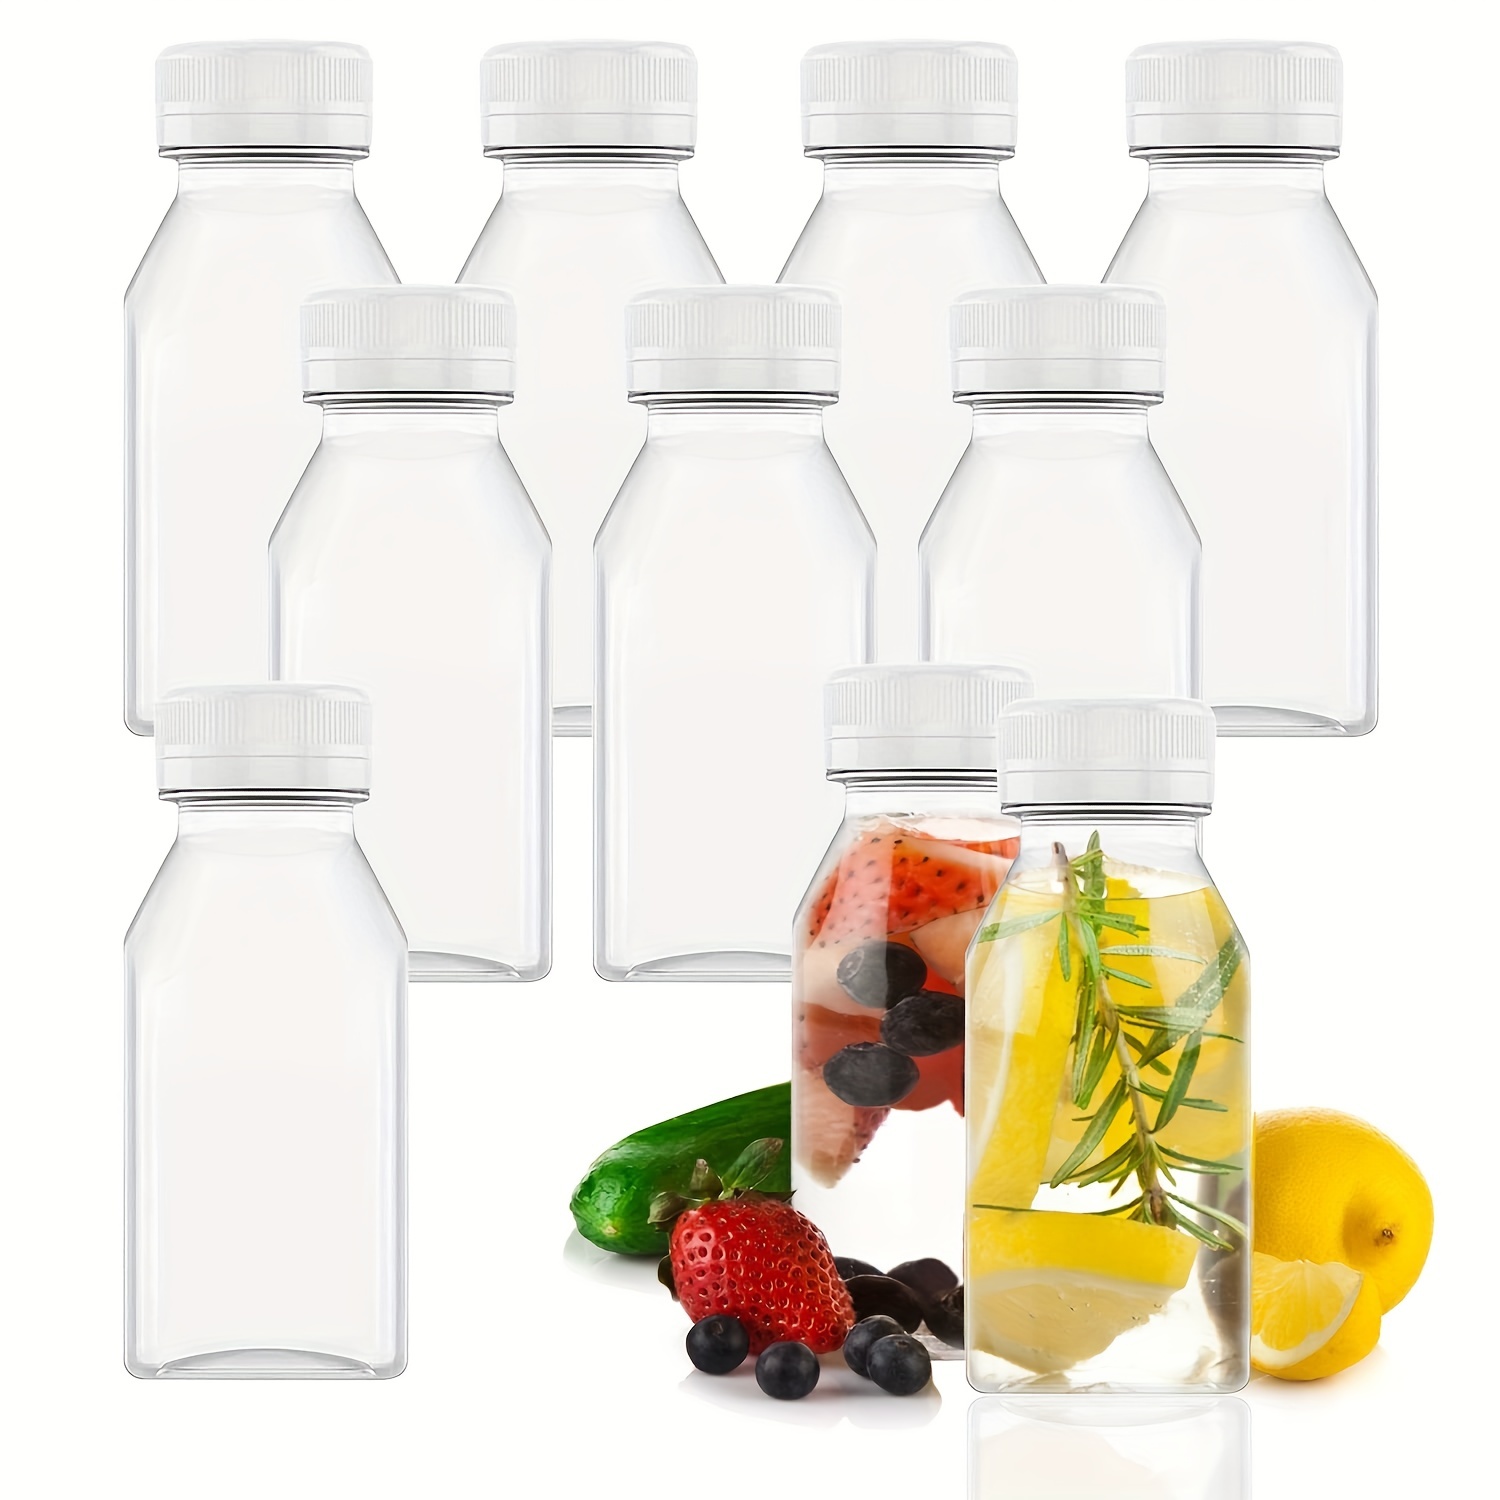 Juice Bottles with Caps for Juicing & Smoothies, Reusable Clear Empty  Plastic Bottles with Caps, 550ml Drink Containers for Mini Fridge, Juicer  Shots